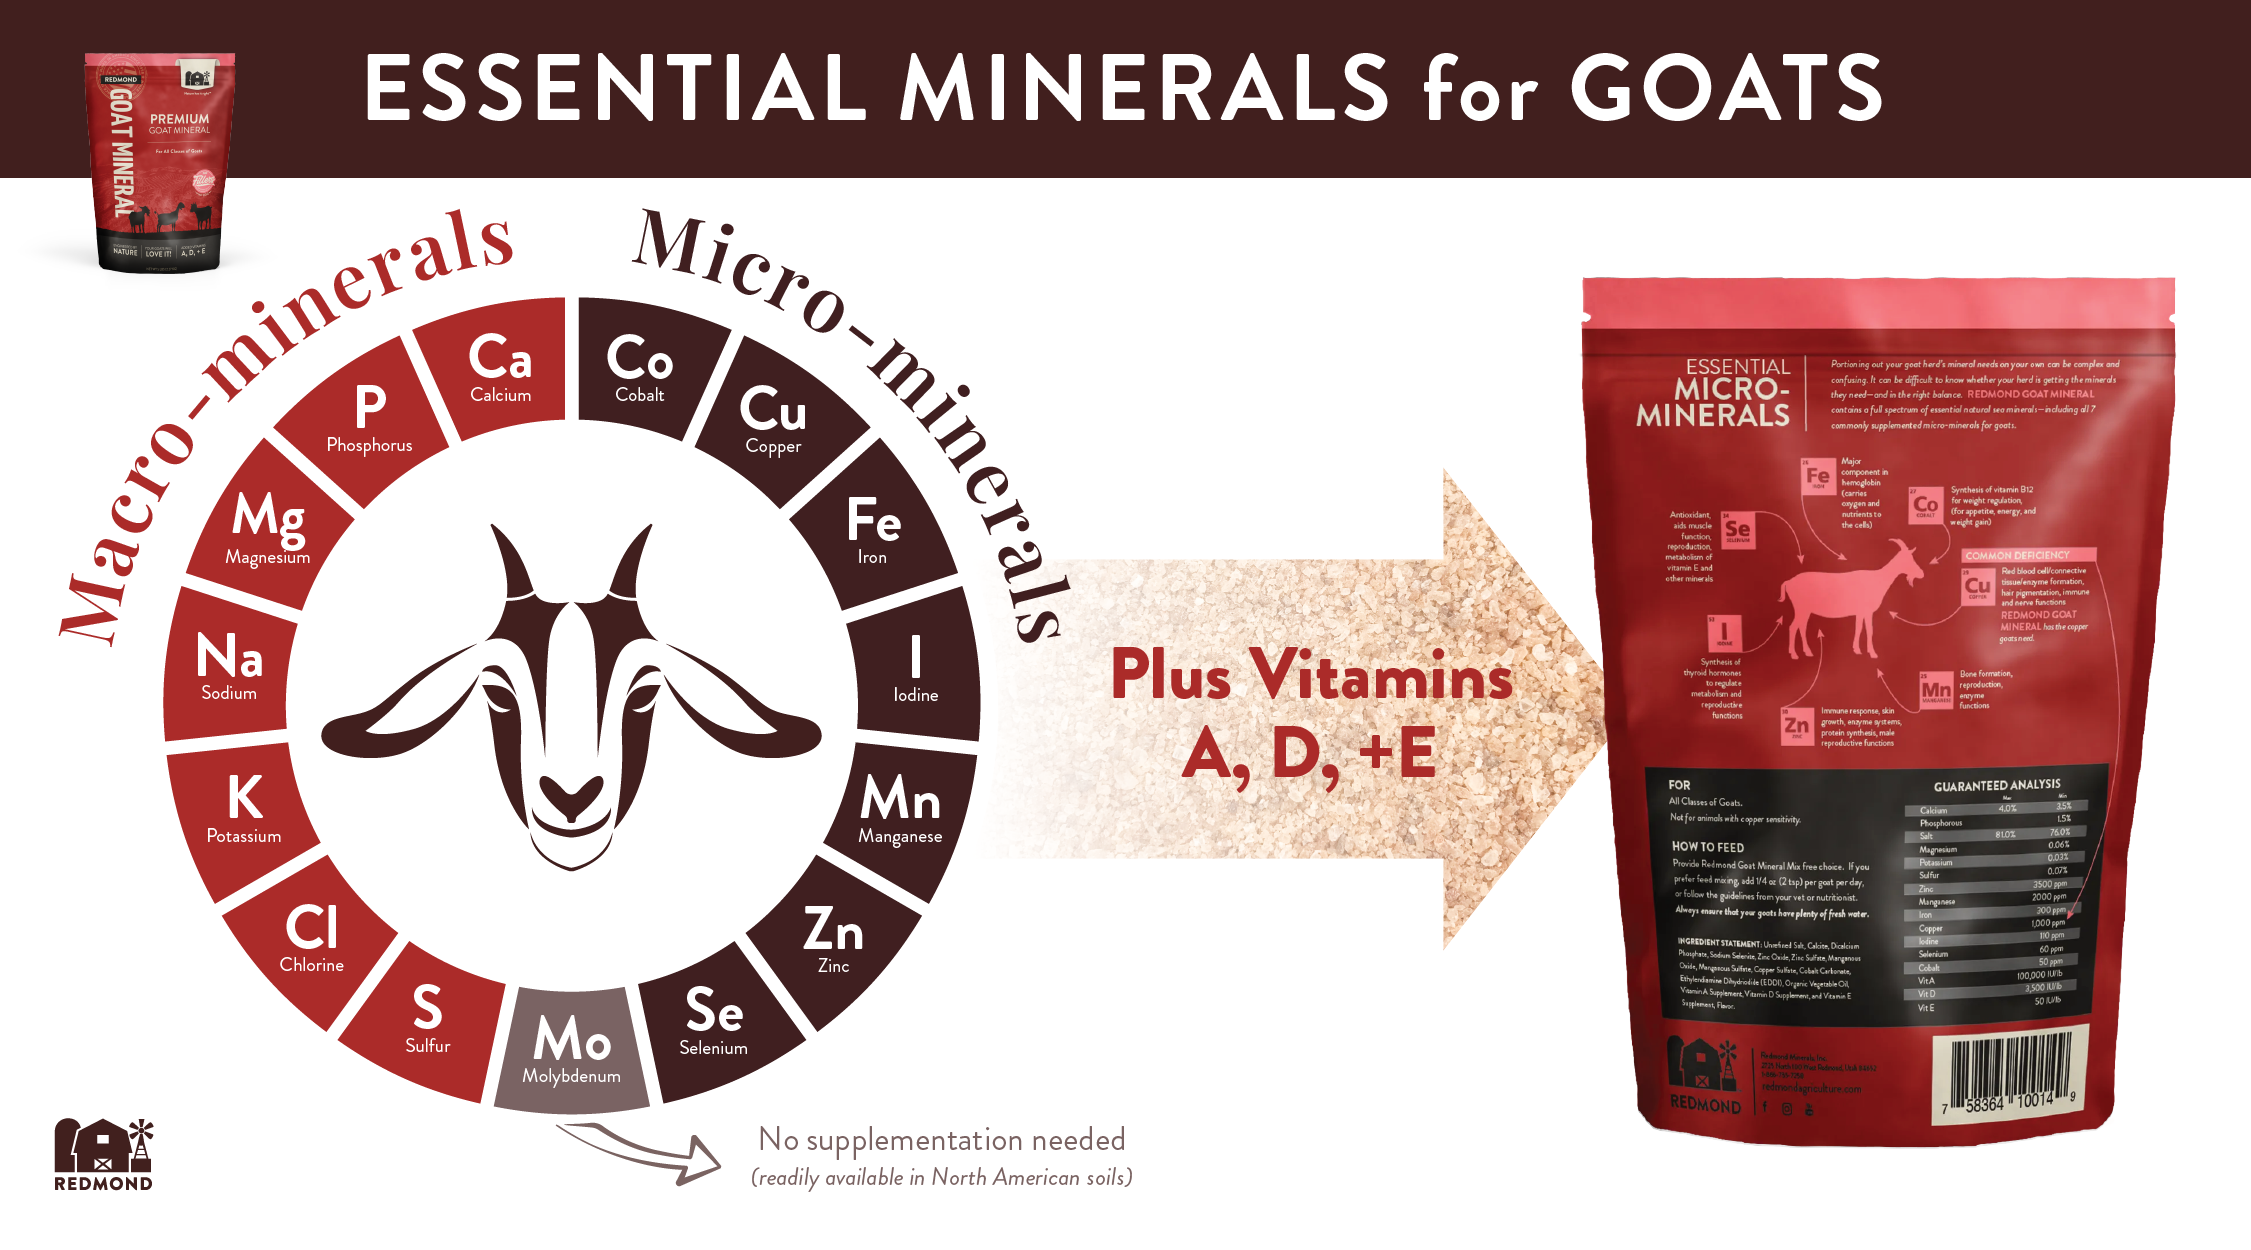 Minerals that goats need